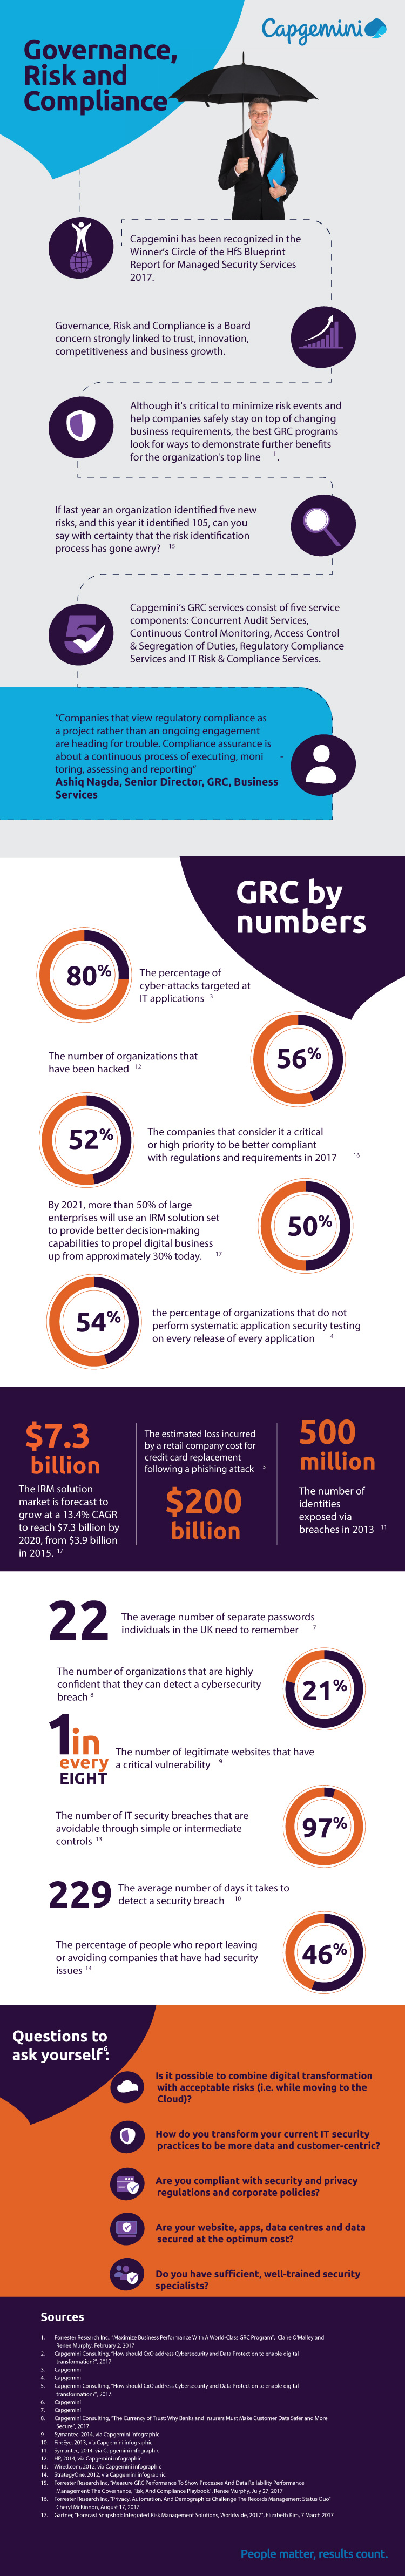 Governance Risk and Compliance(GRC) Infographic